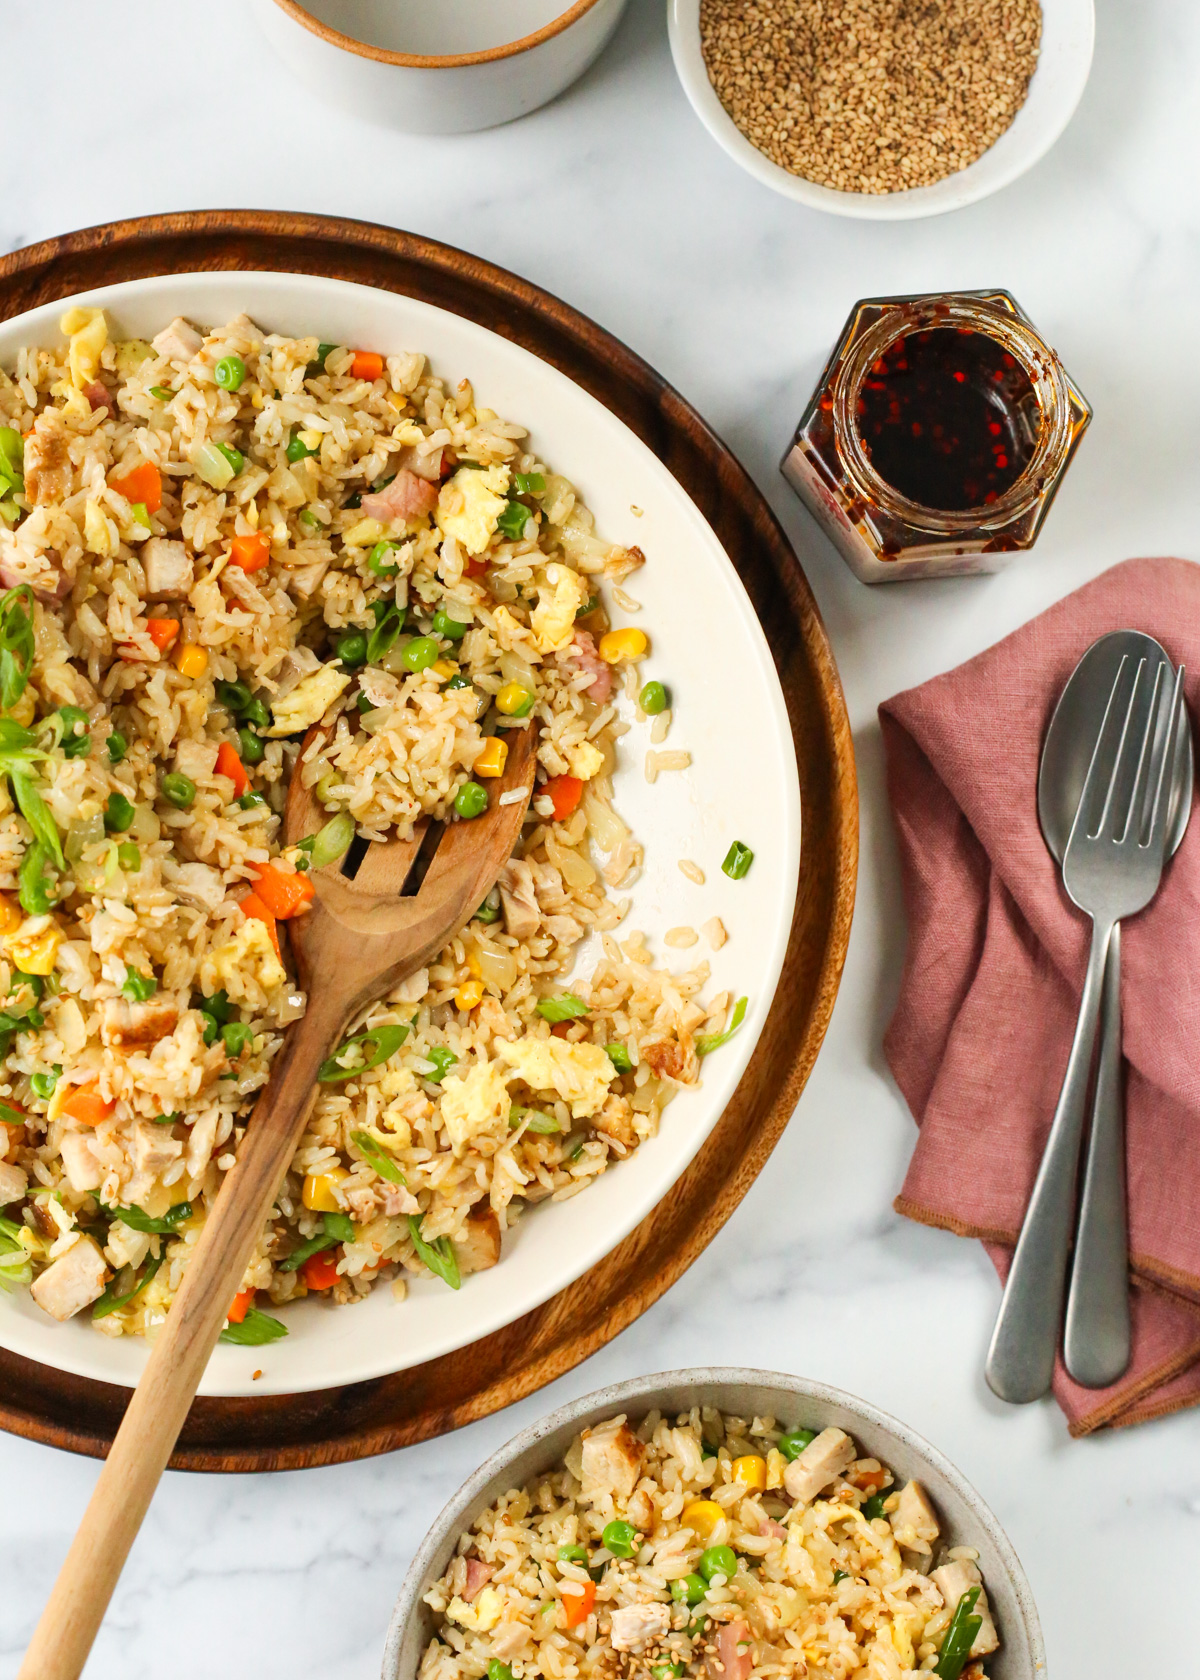 Overhead view of a serving bowl of turkey fried rice with a wooden serving spoon nestled on the right side, with a served portion in a smaller bowl in the lower portion of the image, and various garnishes displayed nearby